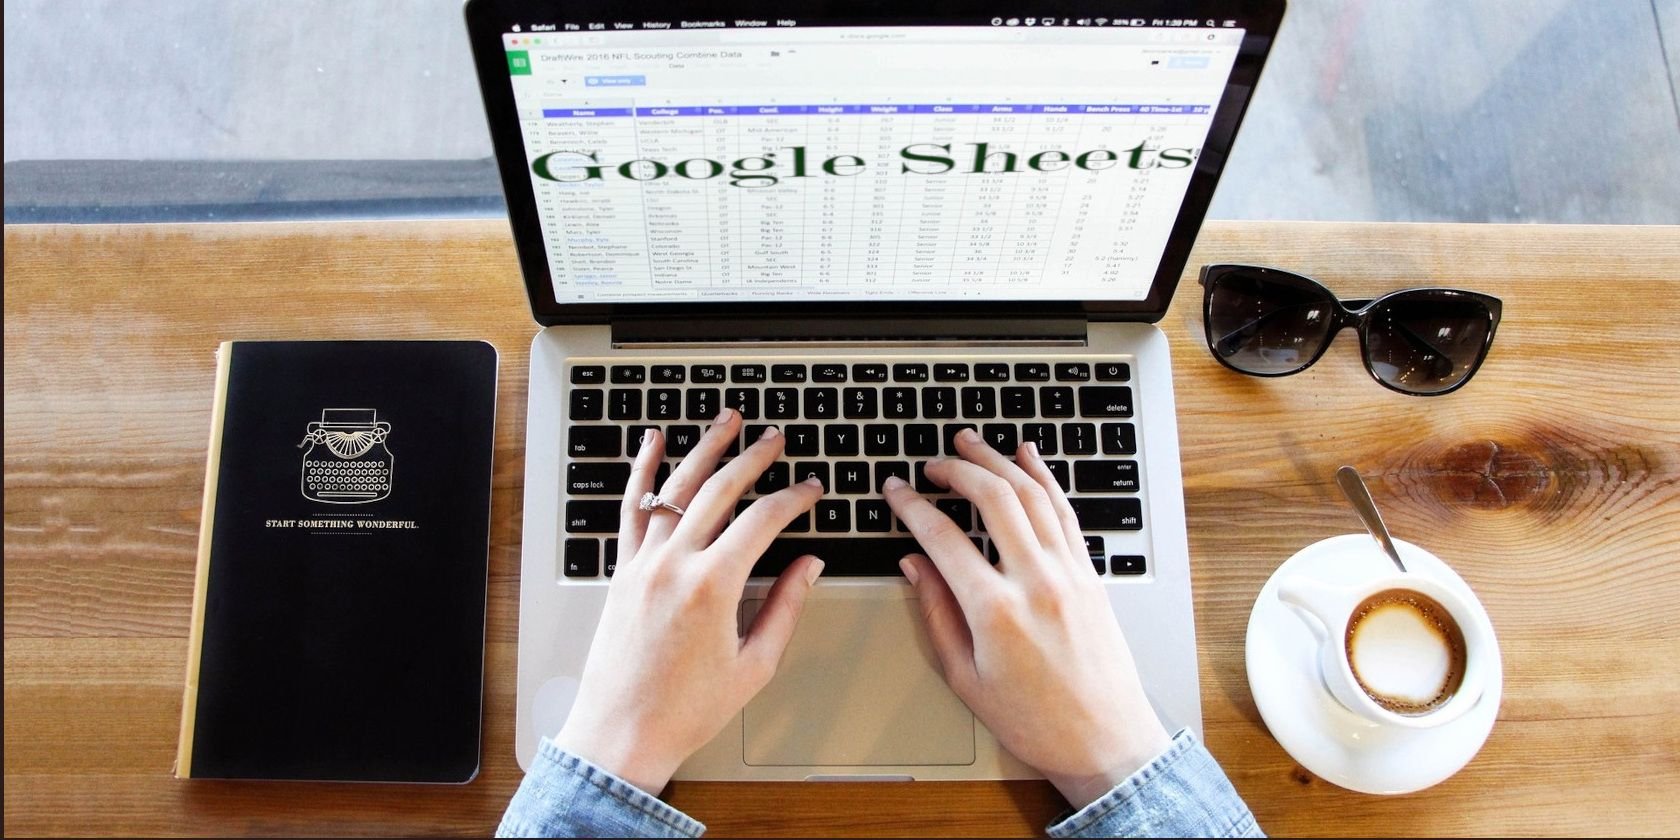 How to Share Your Google Sheets With Others